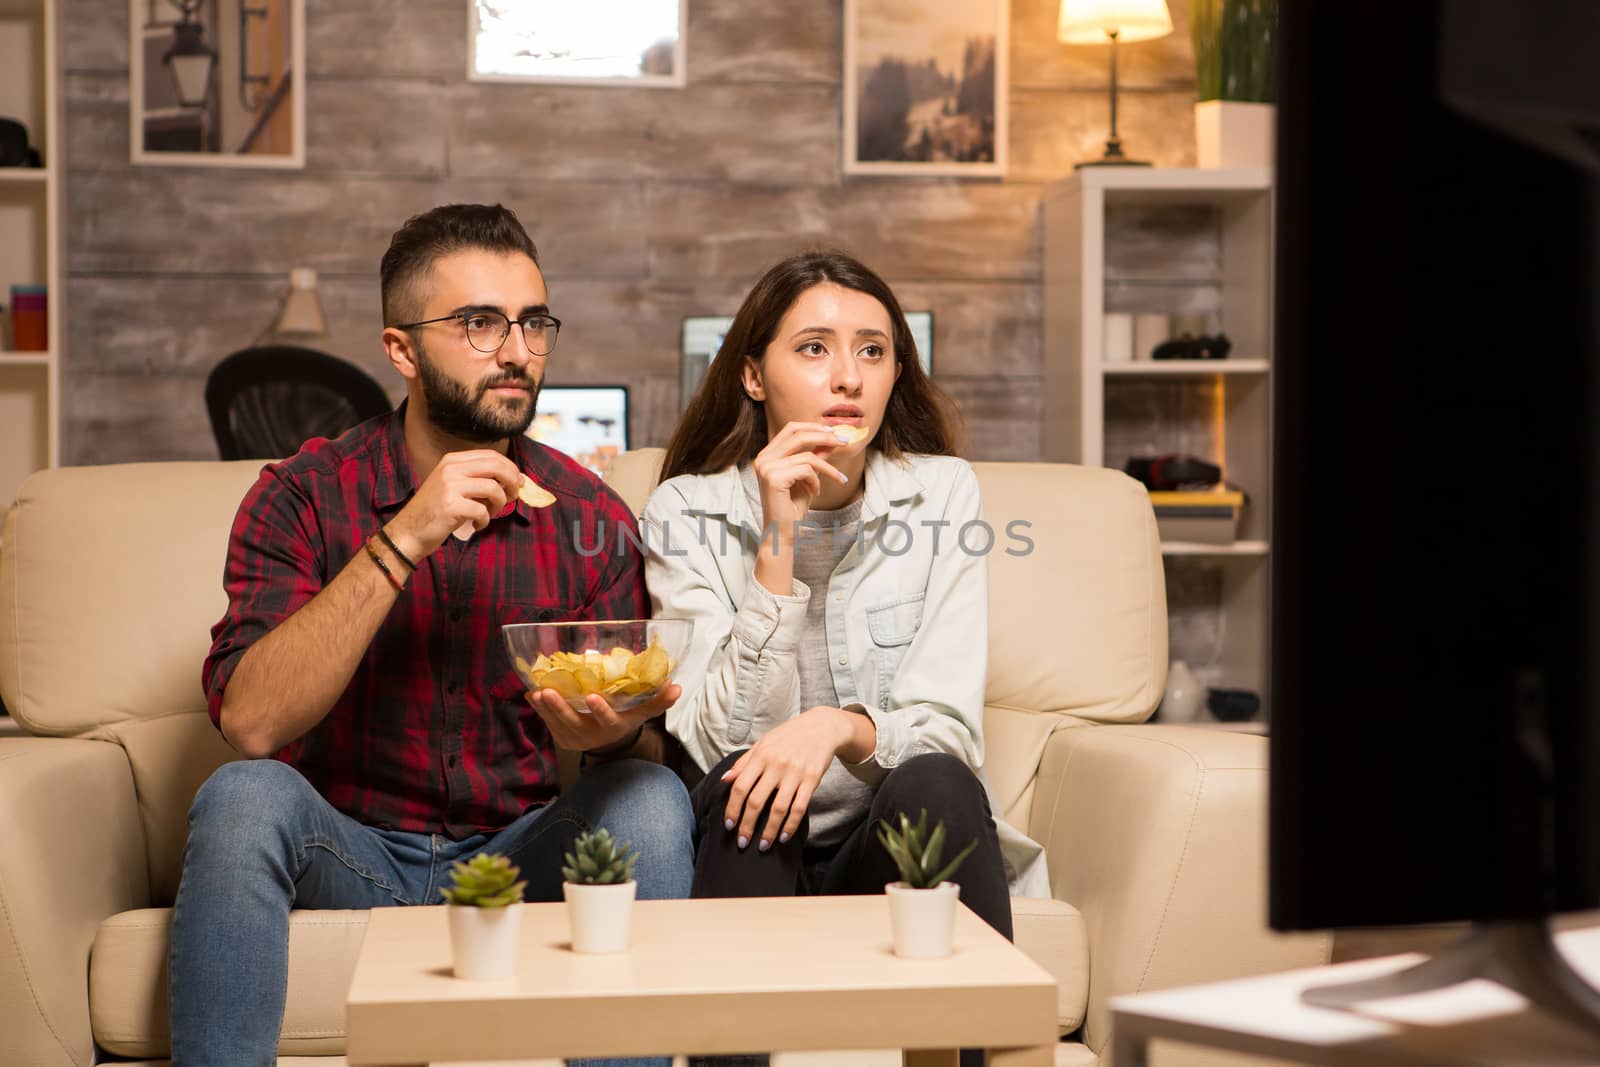 Beautiful young couple looking worried at tv while watching a movie. Couple eating chips sitting on sofa.